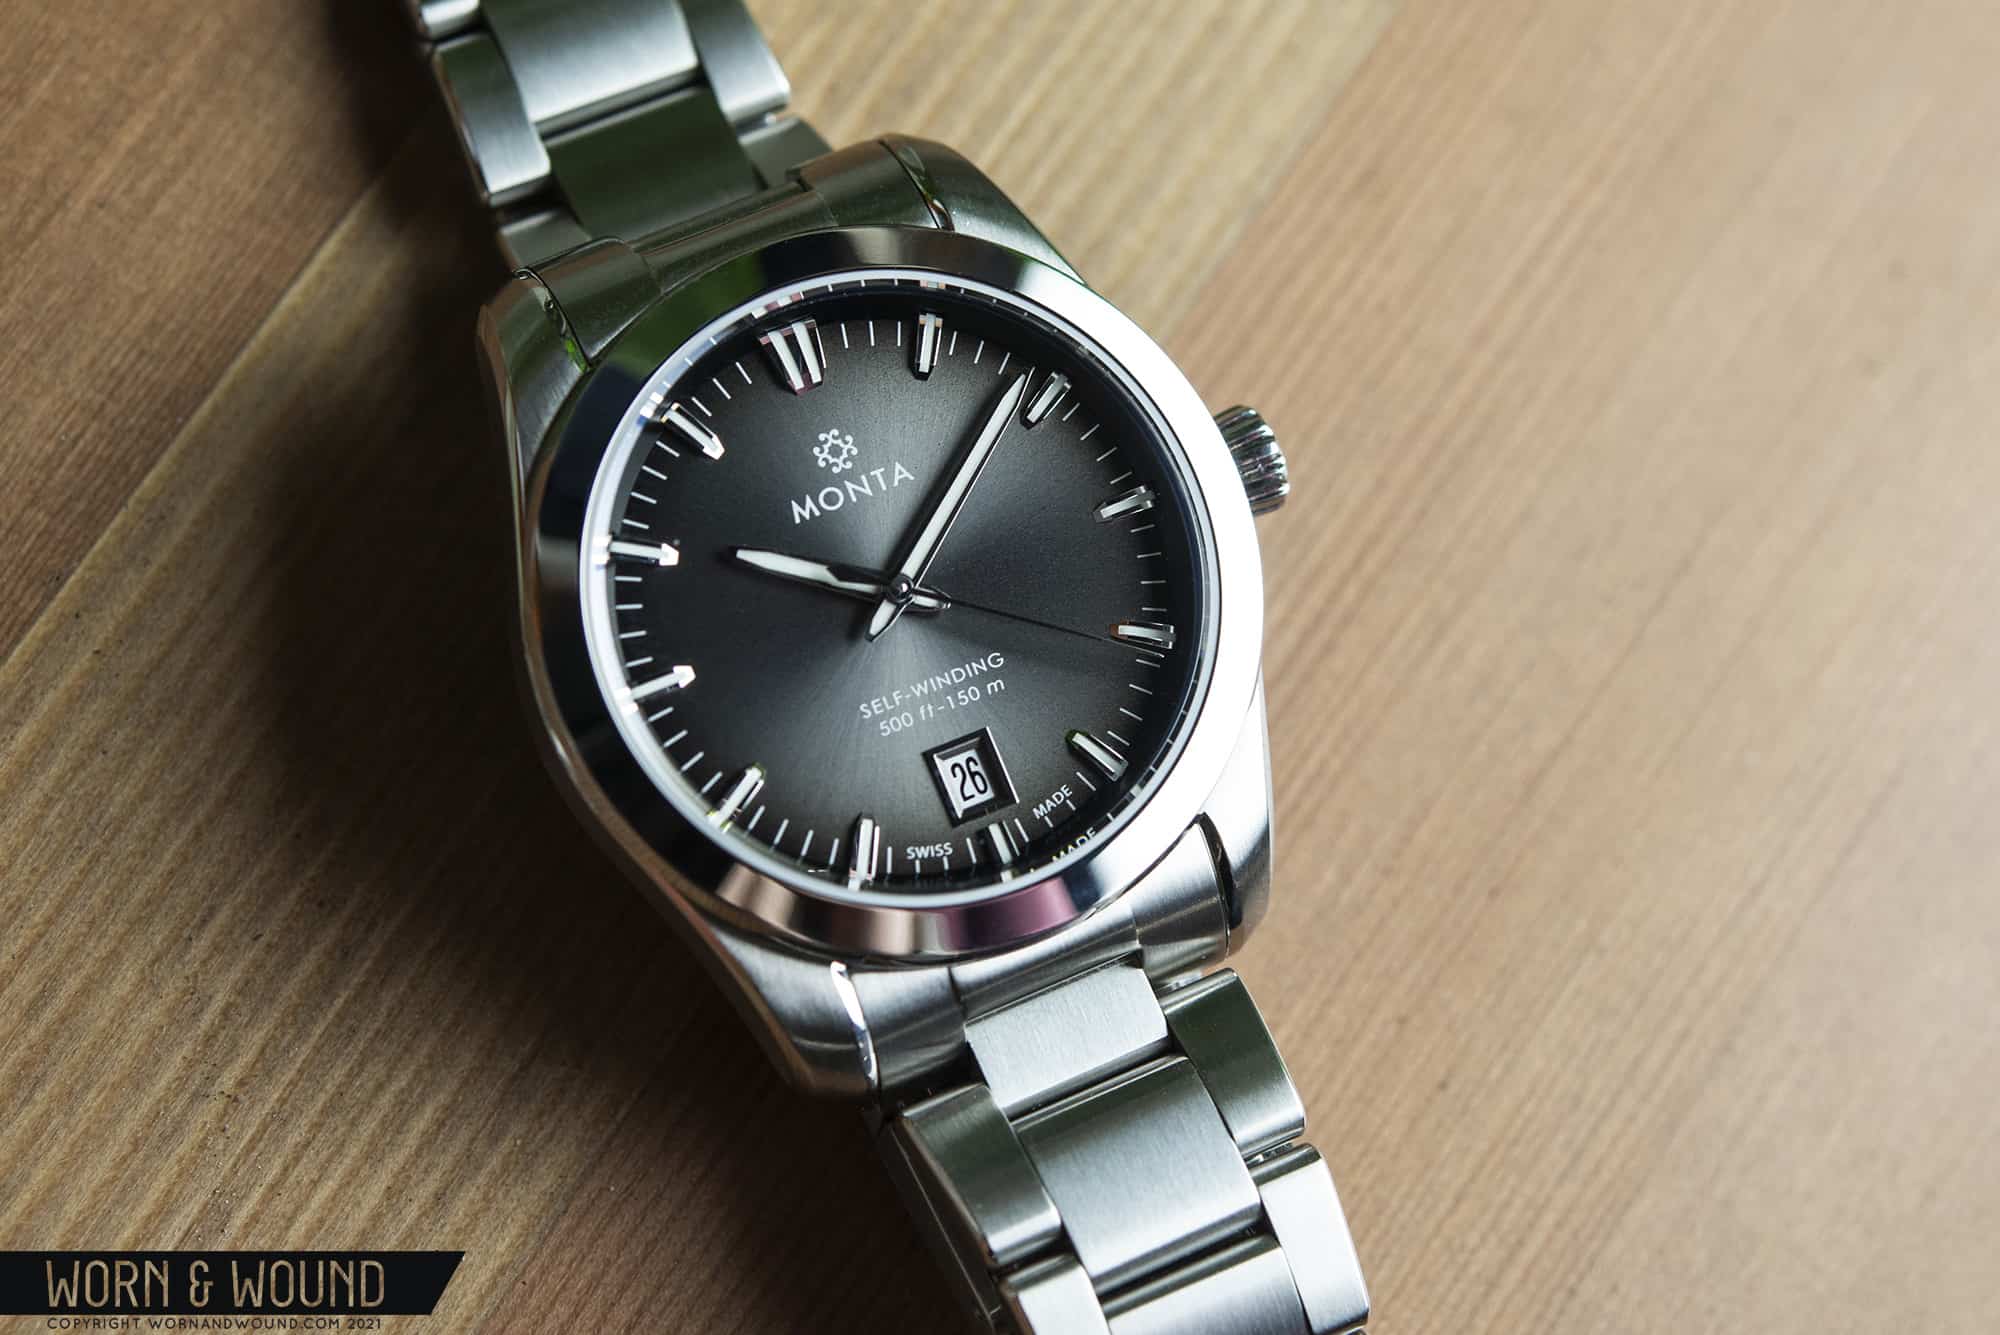 Hands-On With The Monta Noble, Now With Anthracite Dial